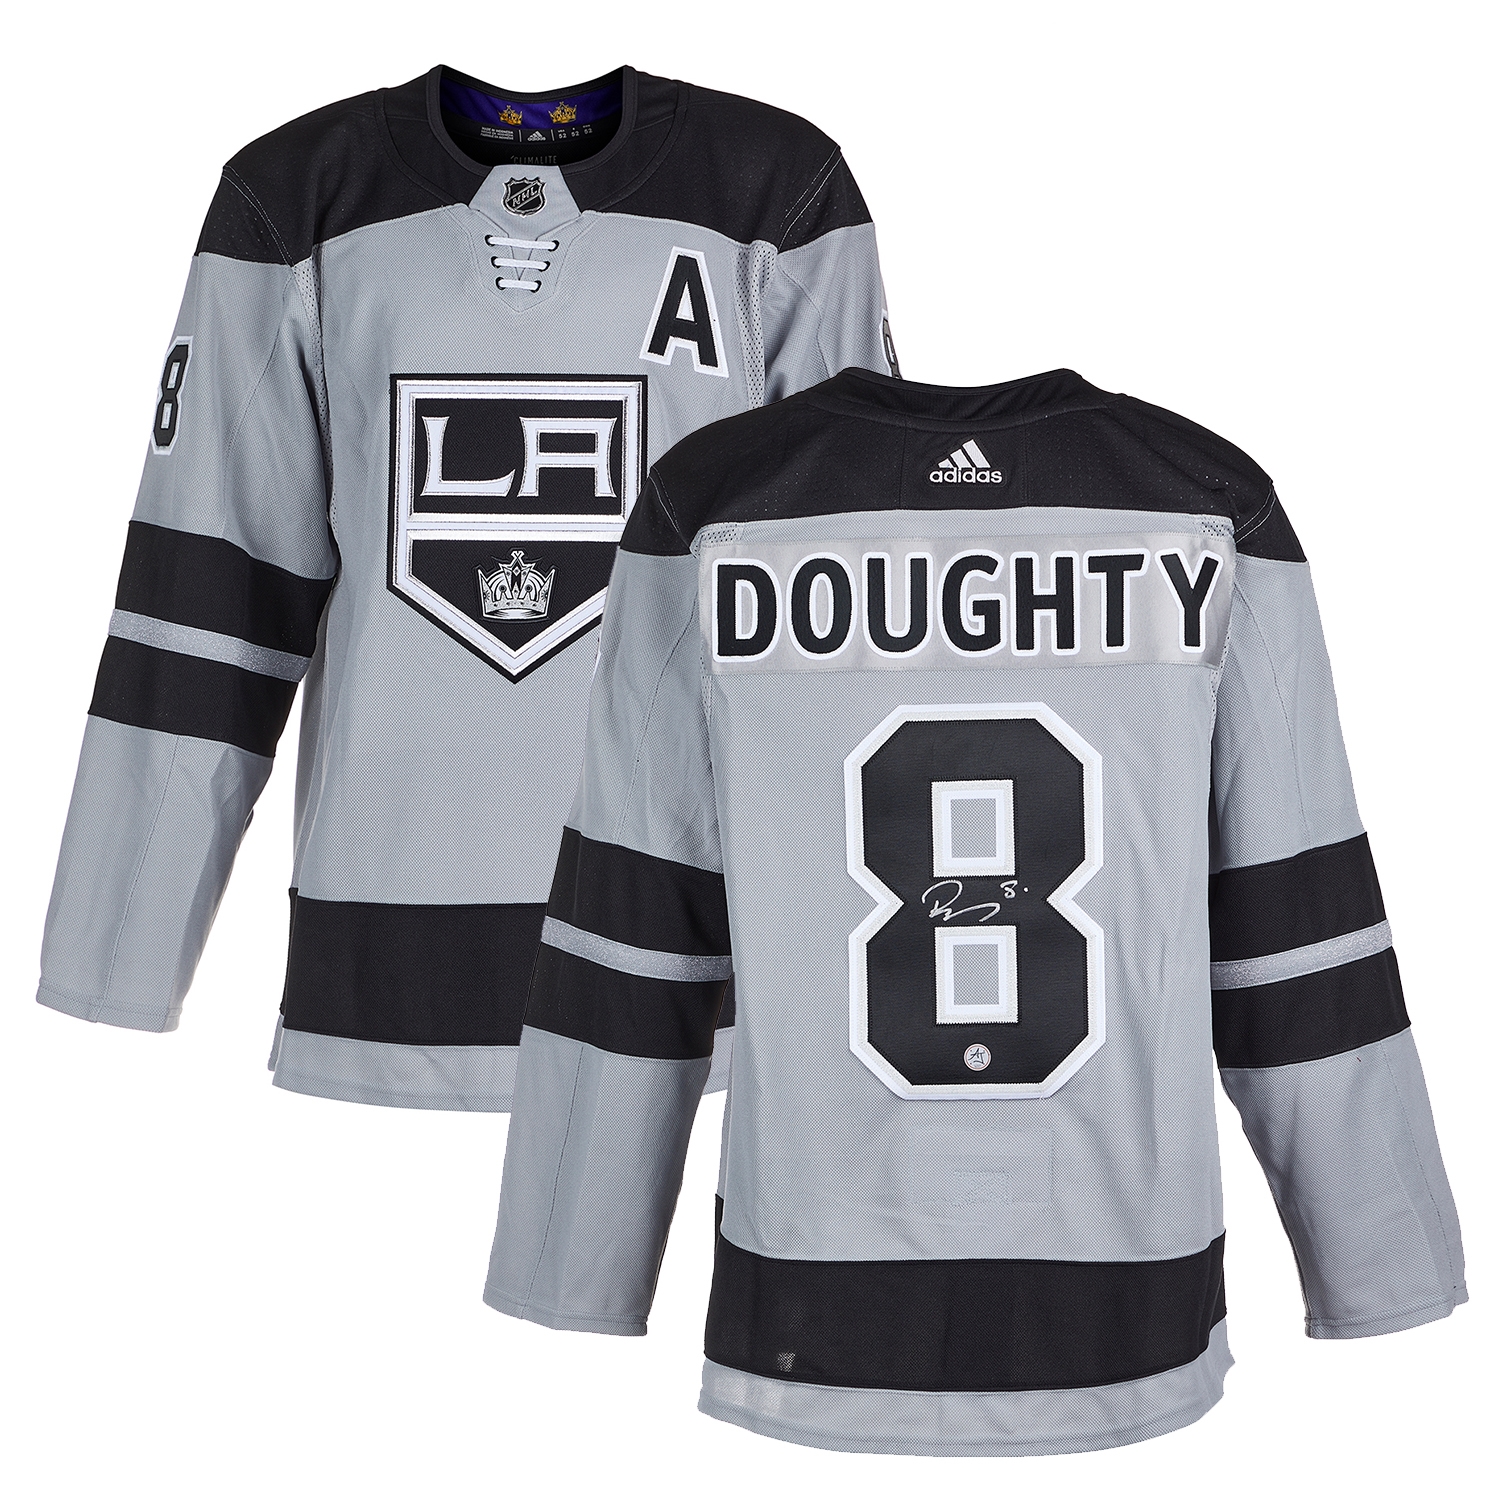 Drew Doughty Los Angeles Kings Signed Alt Grey adidas Jersey